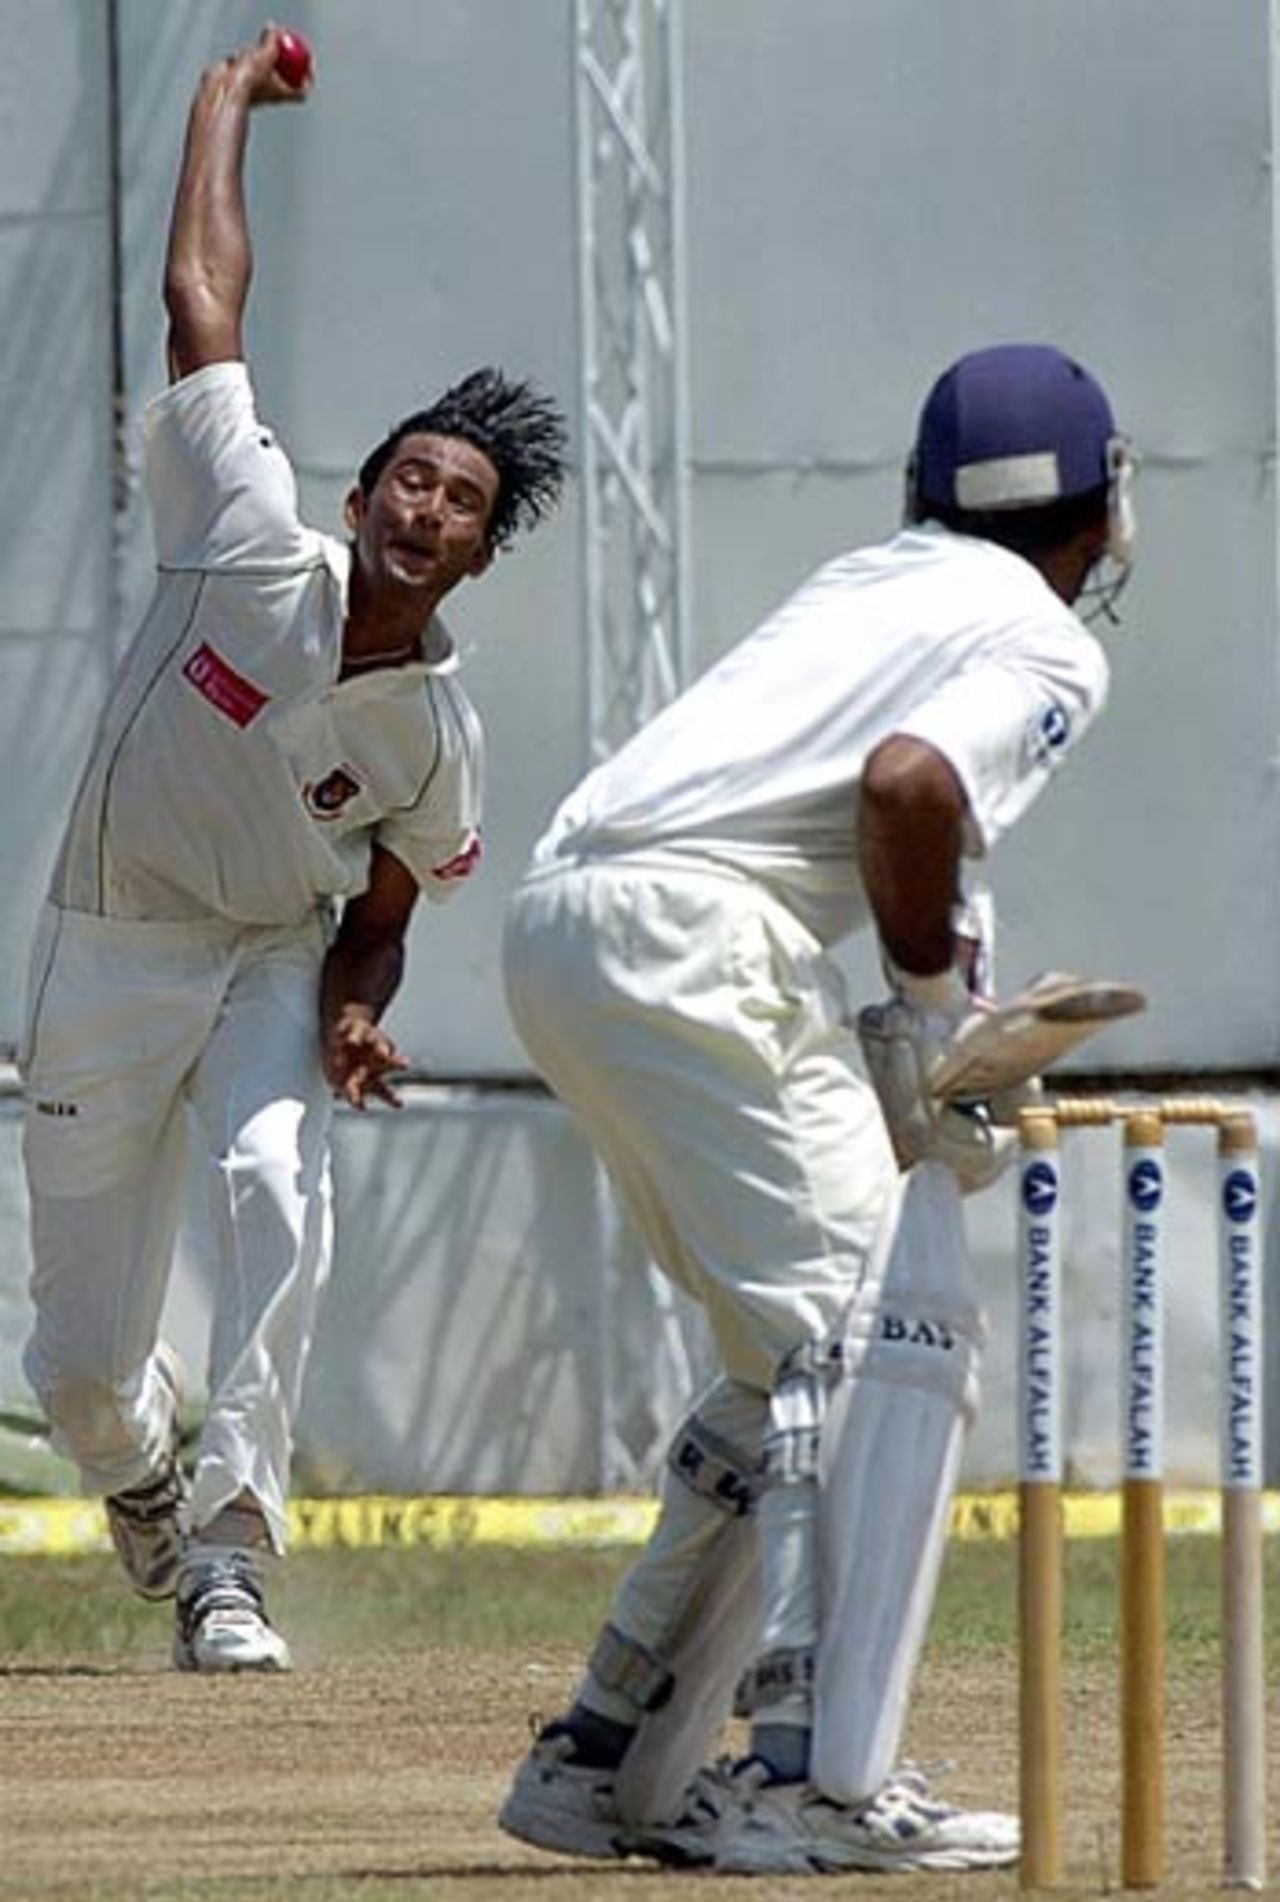 Shahadat Hossain bowls to Mahela Jayawardene during an inspired opening spell in which he picked up two wickets, Sri Lanka v Bangladesh, Colombo, September 20, 2005